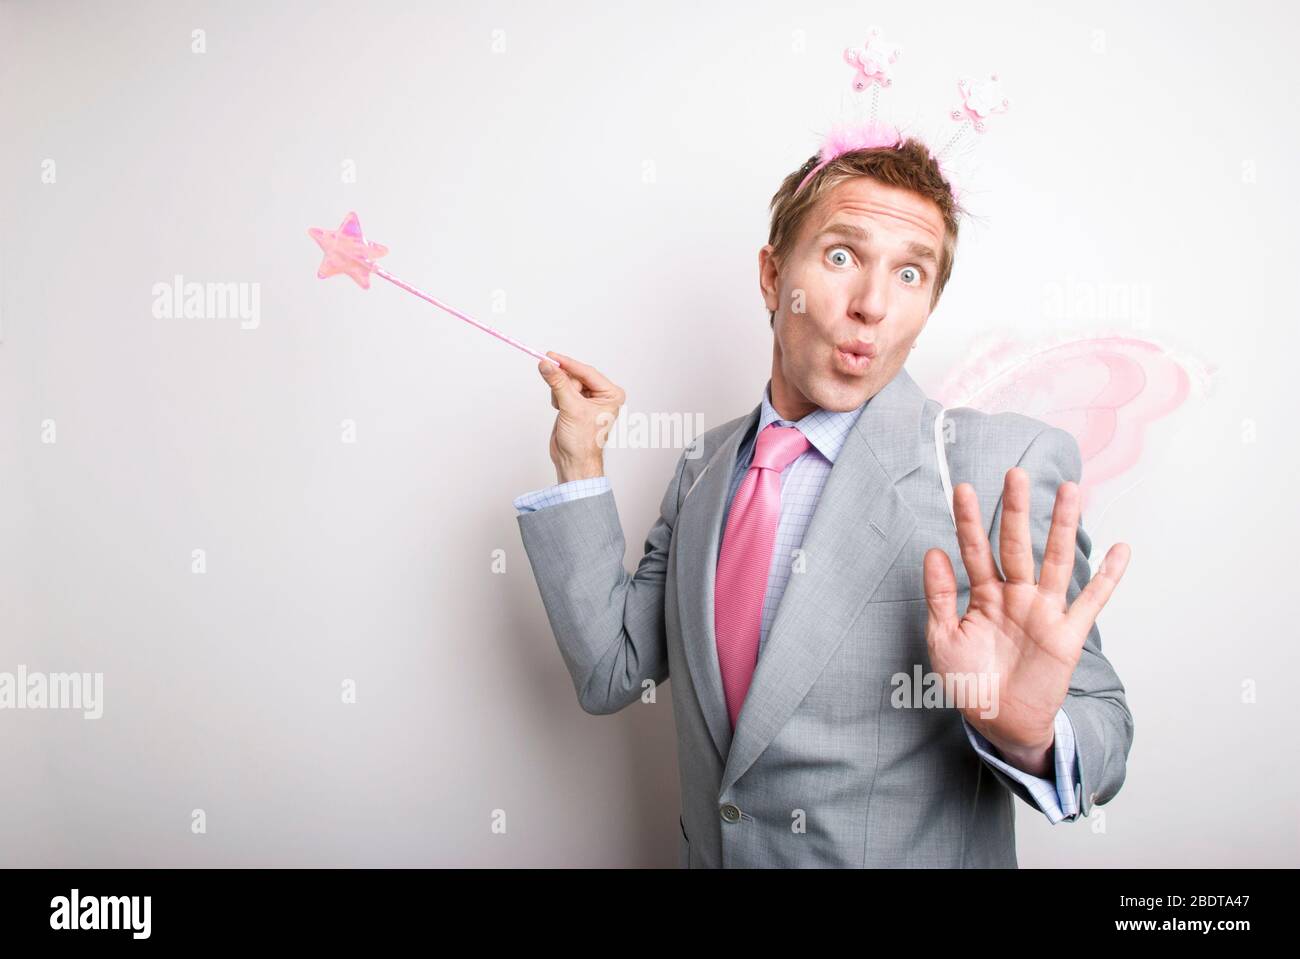 Fairy businessman waving a pink glittery star magic wand granting a wish with a funny expression on his face Stock Photo